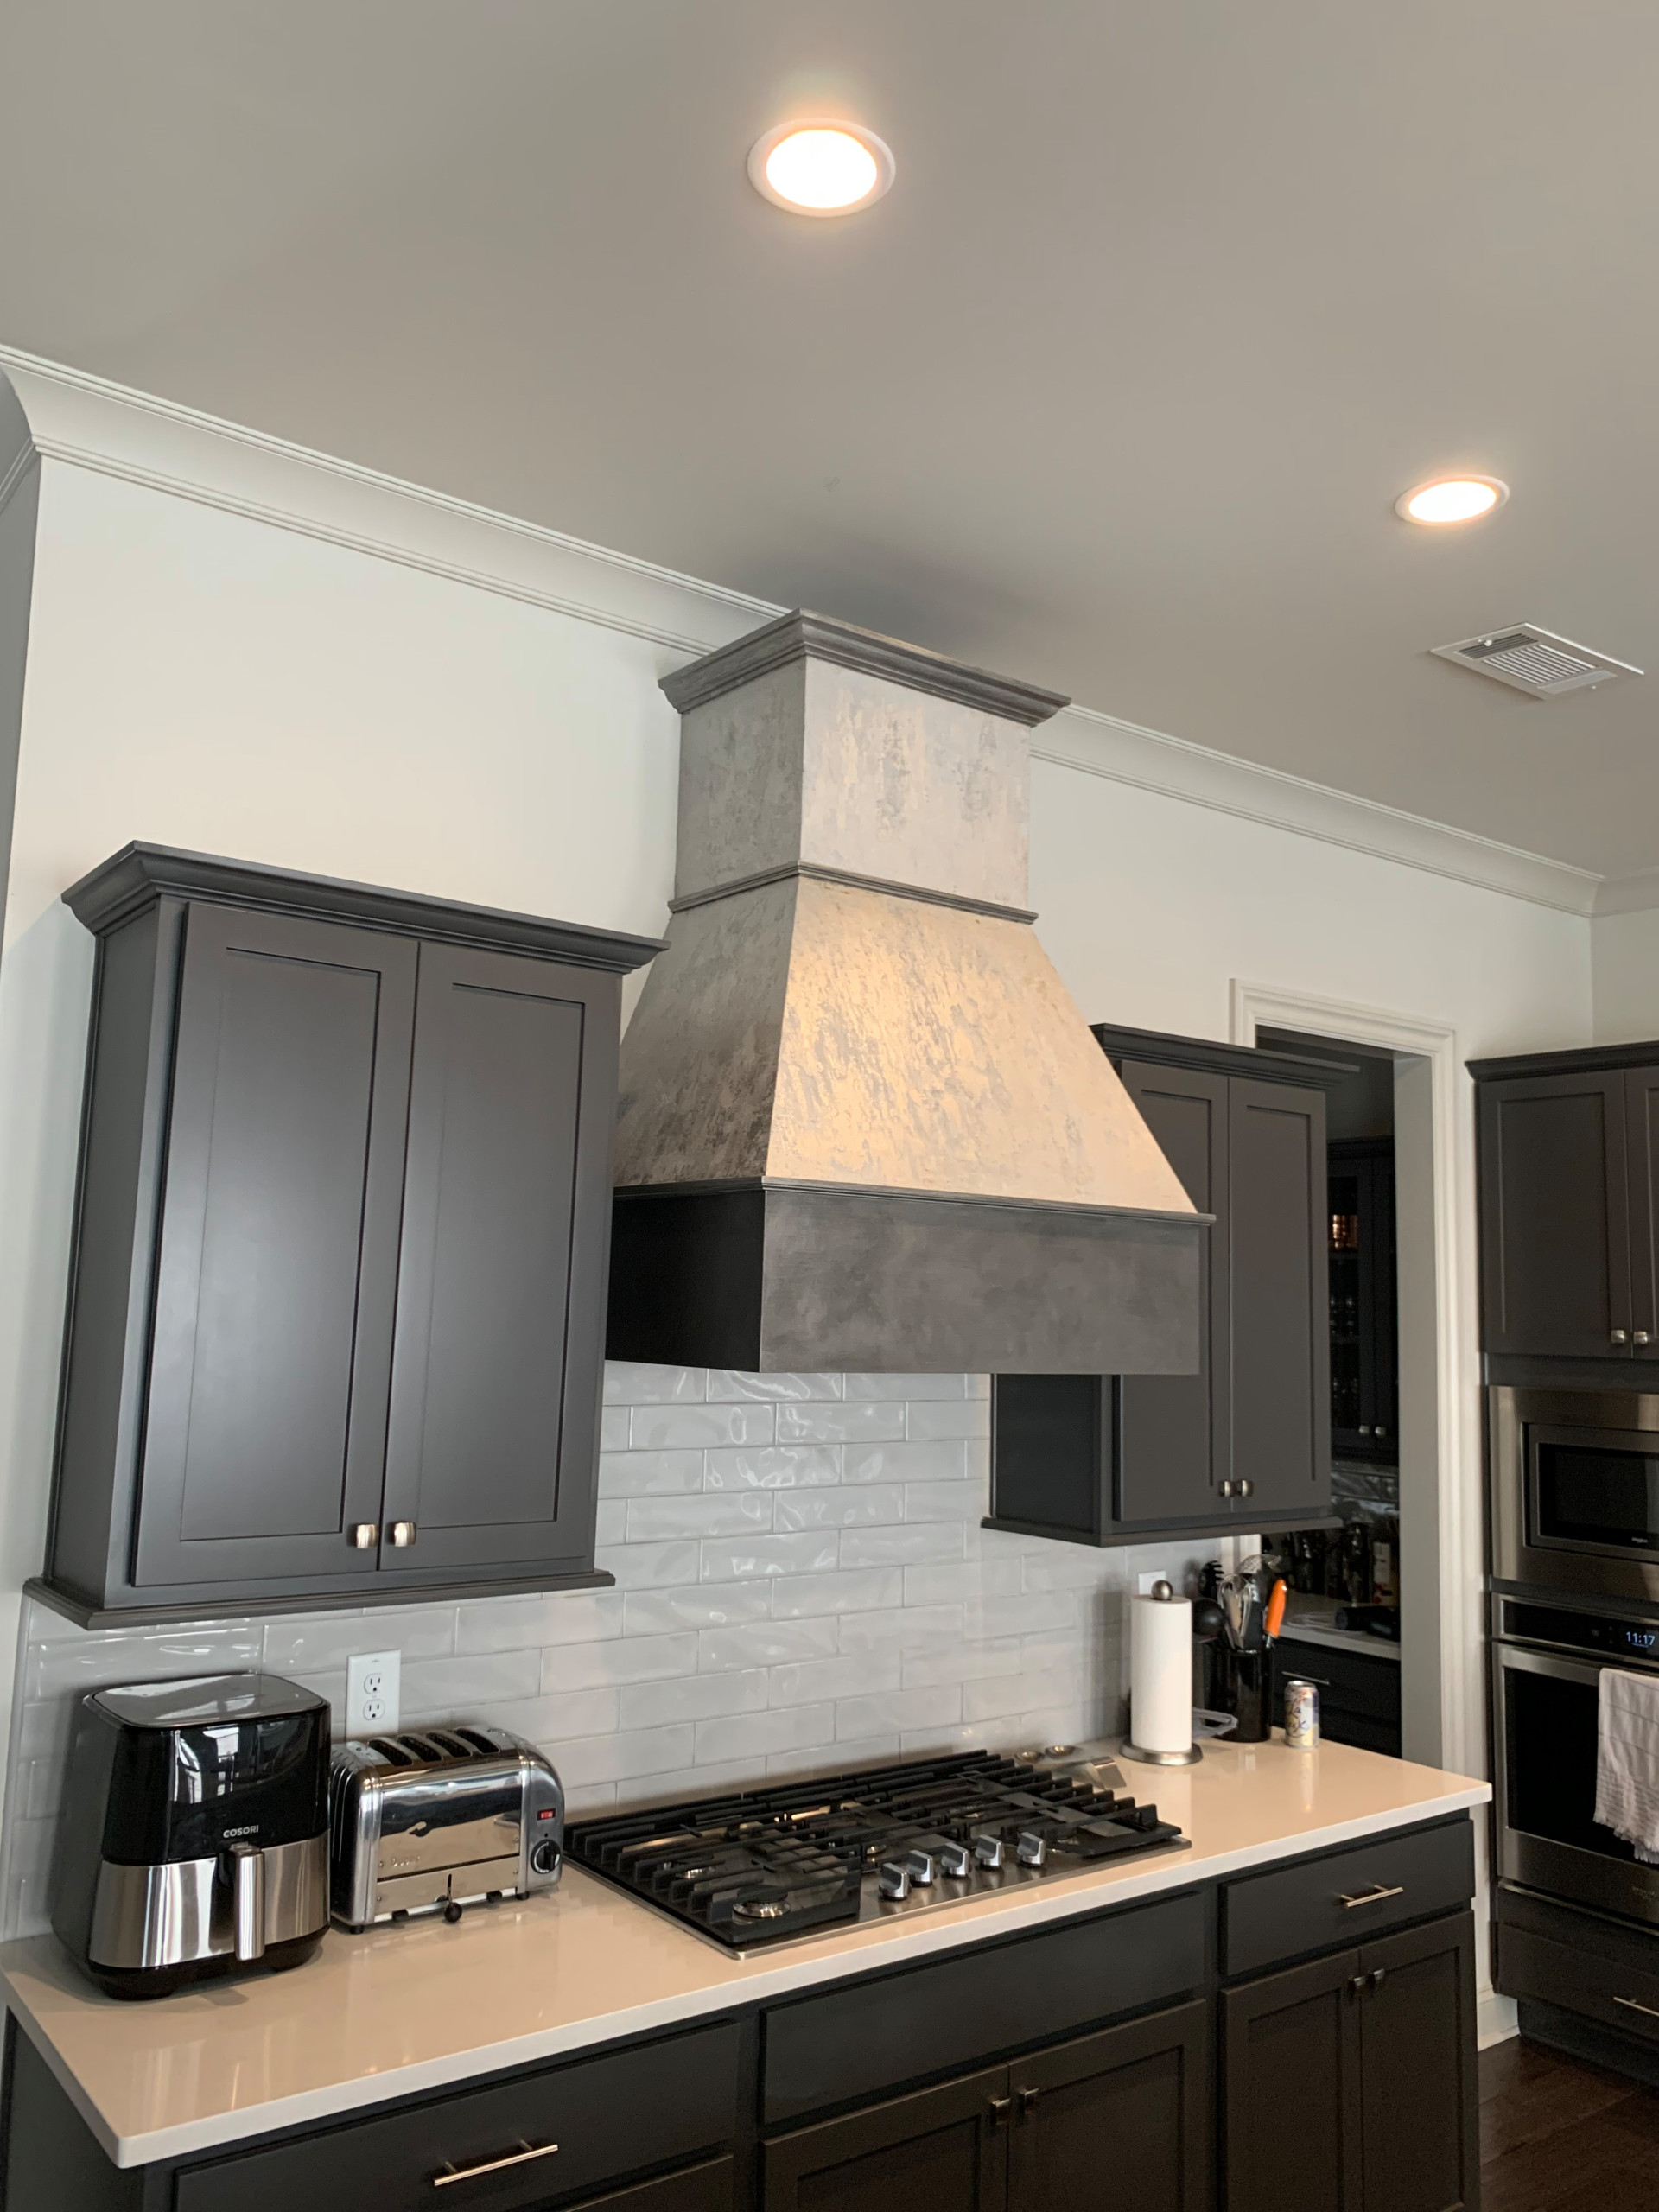 Kitchen hoods and fireplaces.